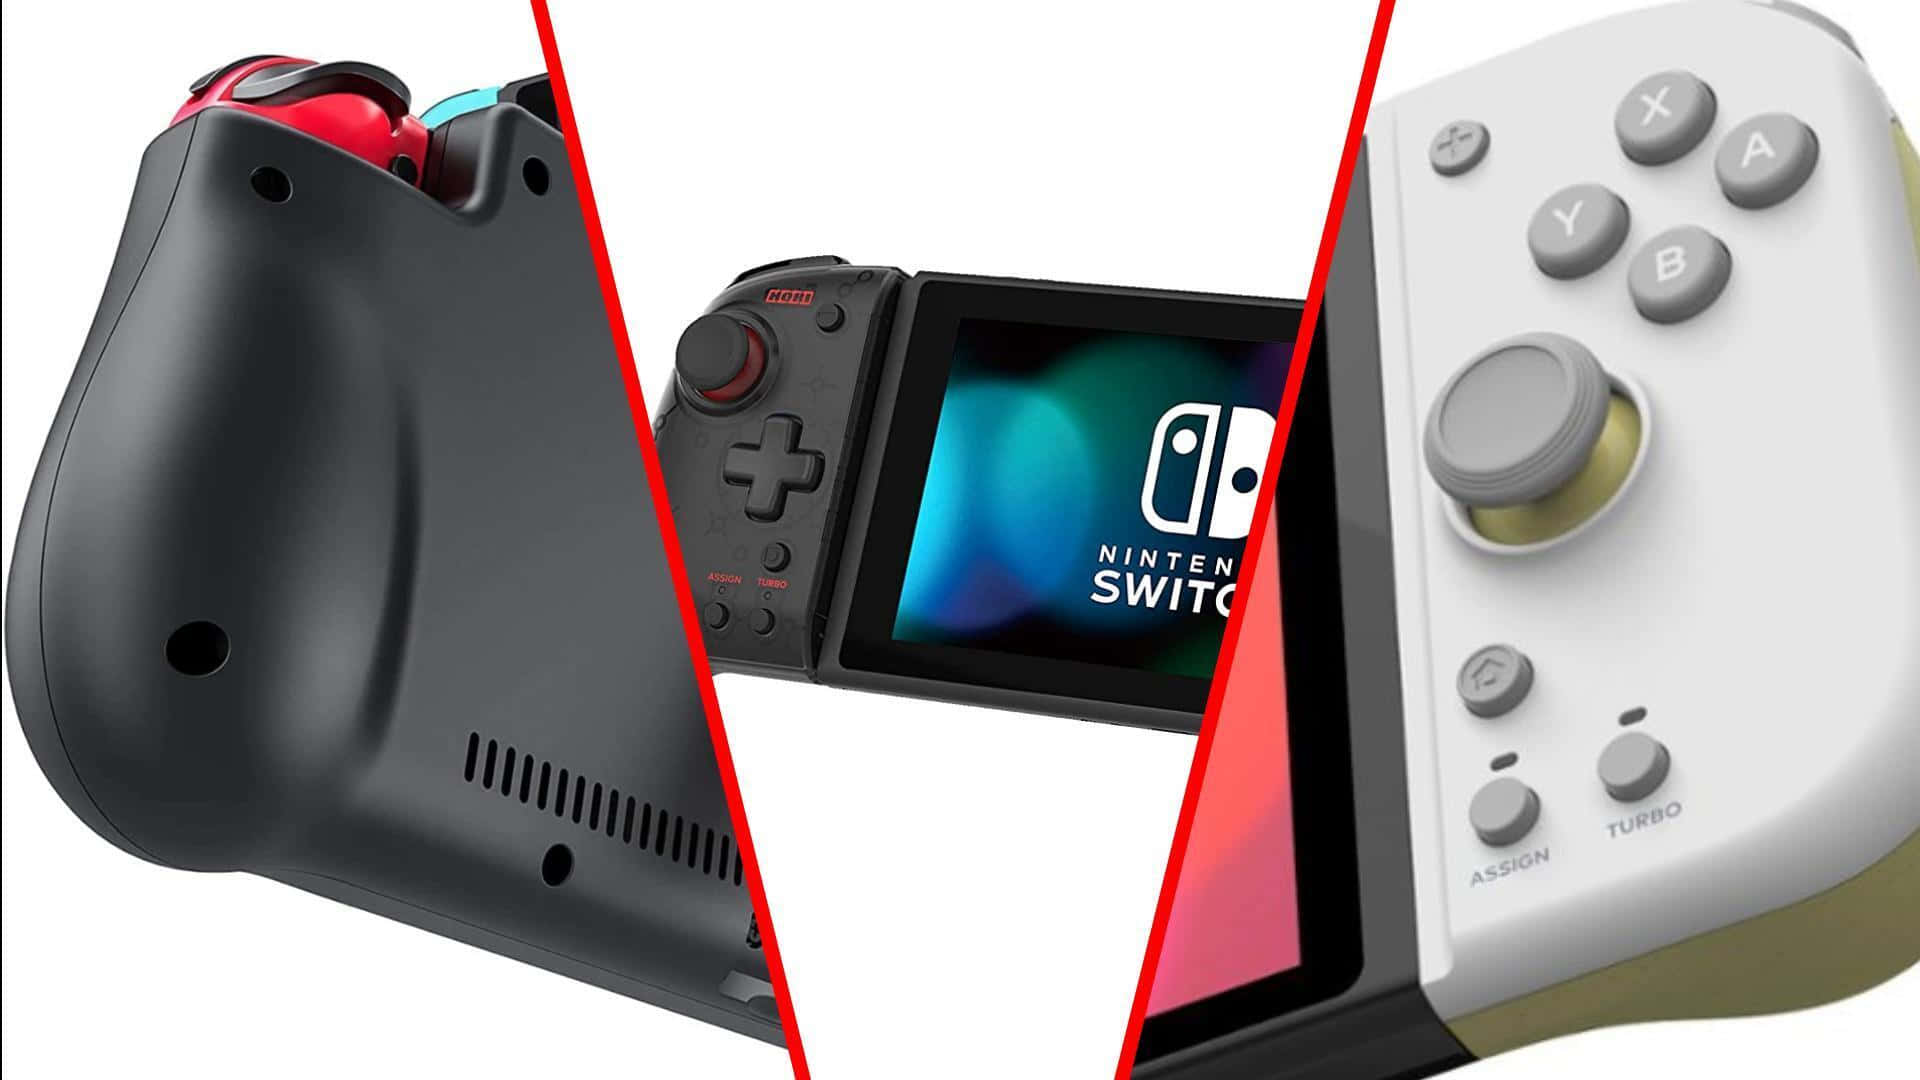 Bring Home the Nintendo Switch Game Console and Jump Into the Fun Today